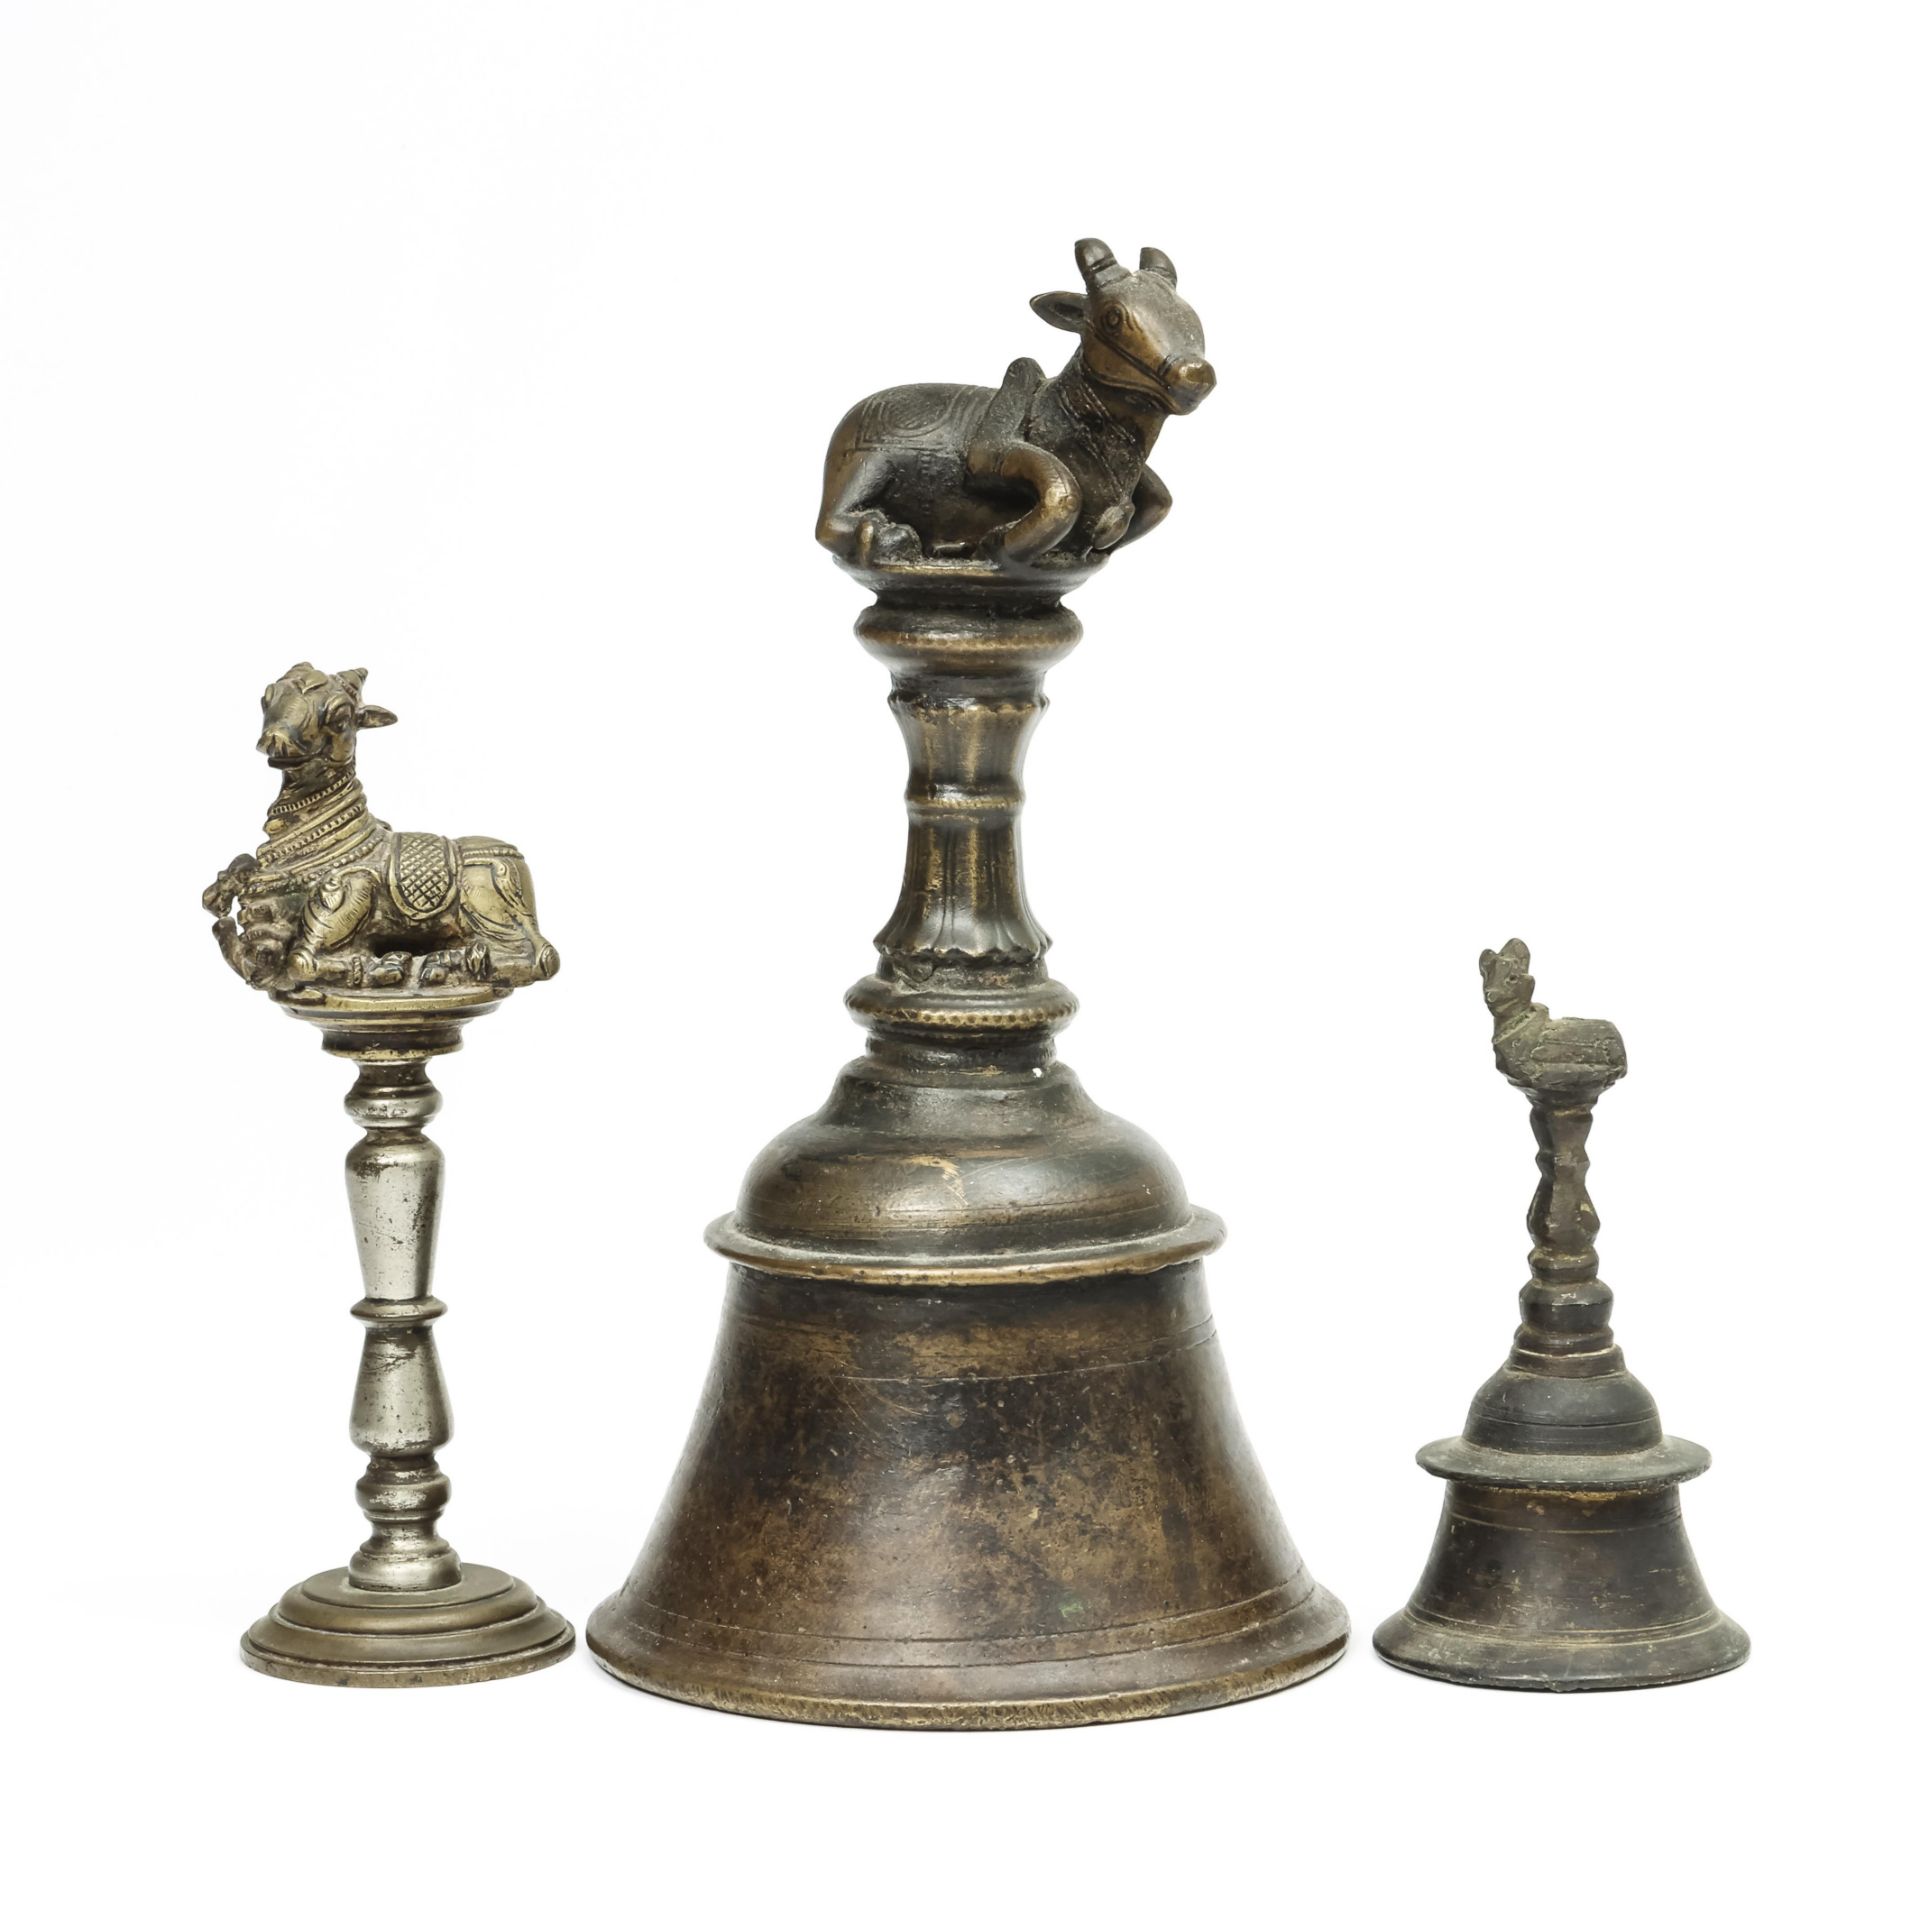 South-India, two priest hand bells surmounted by Nandi and a bull figure on a pedistal, 19th century